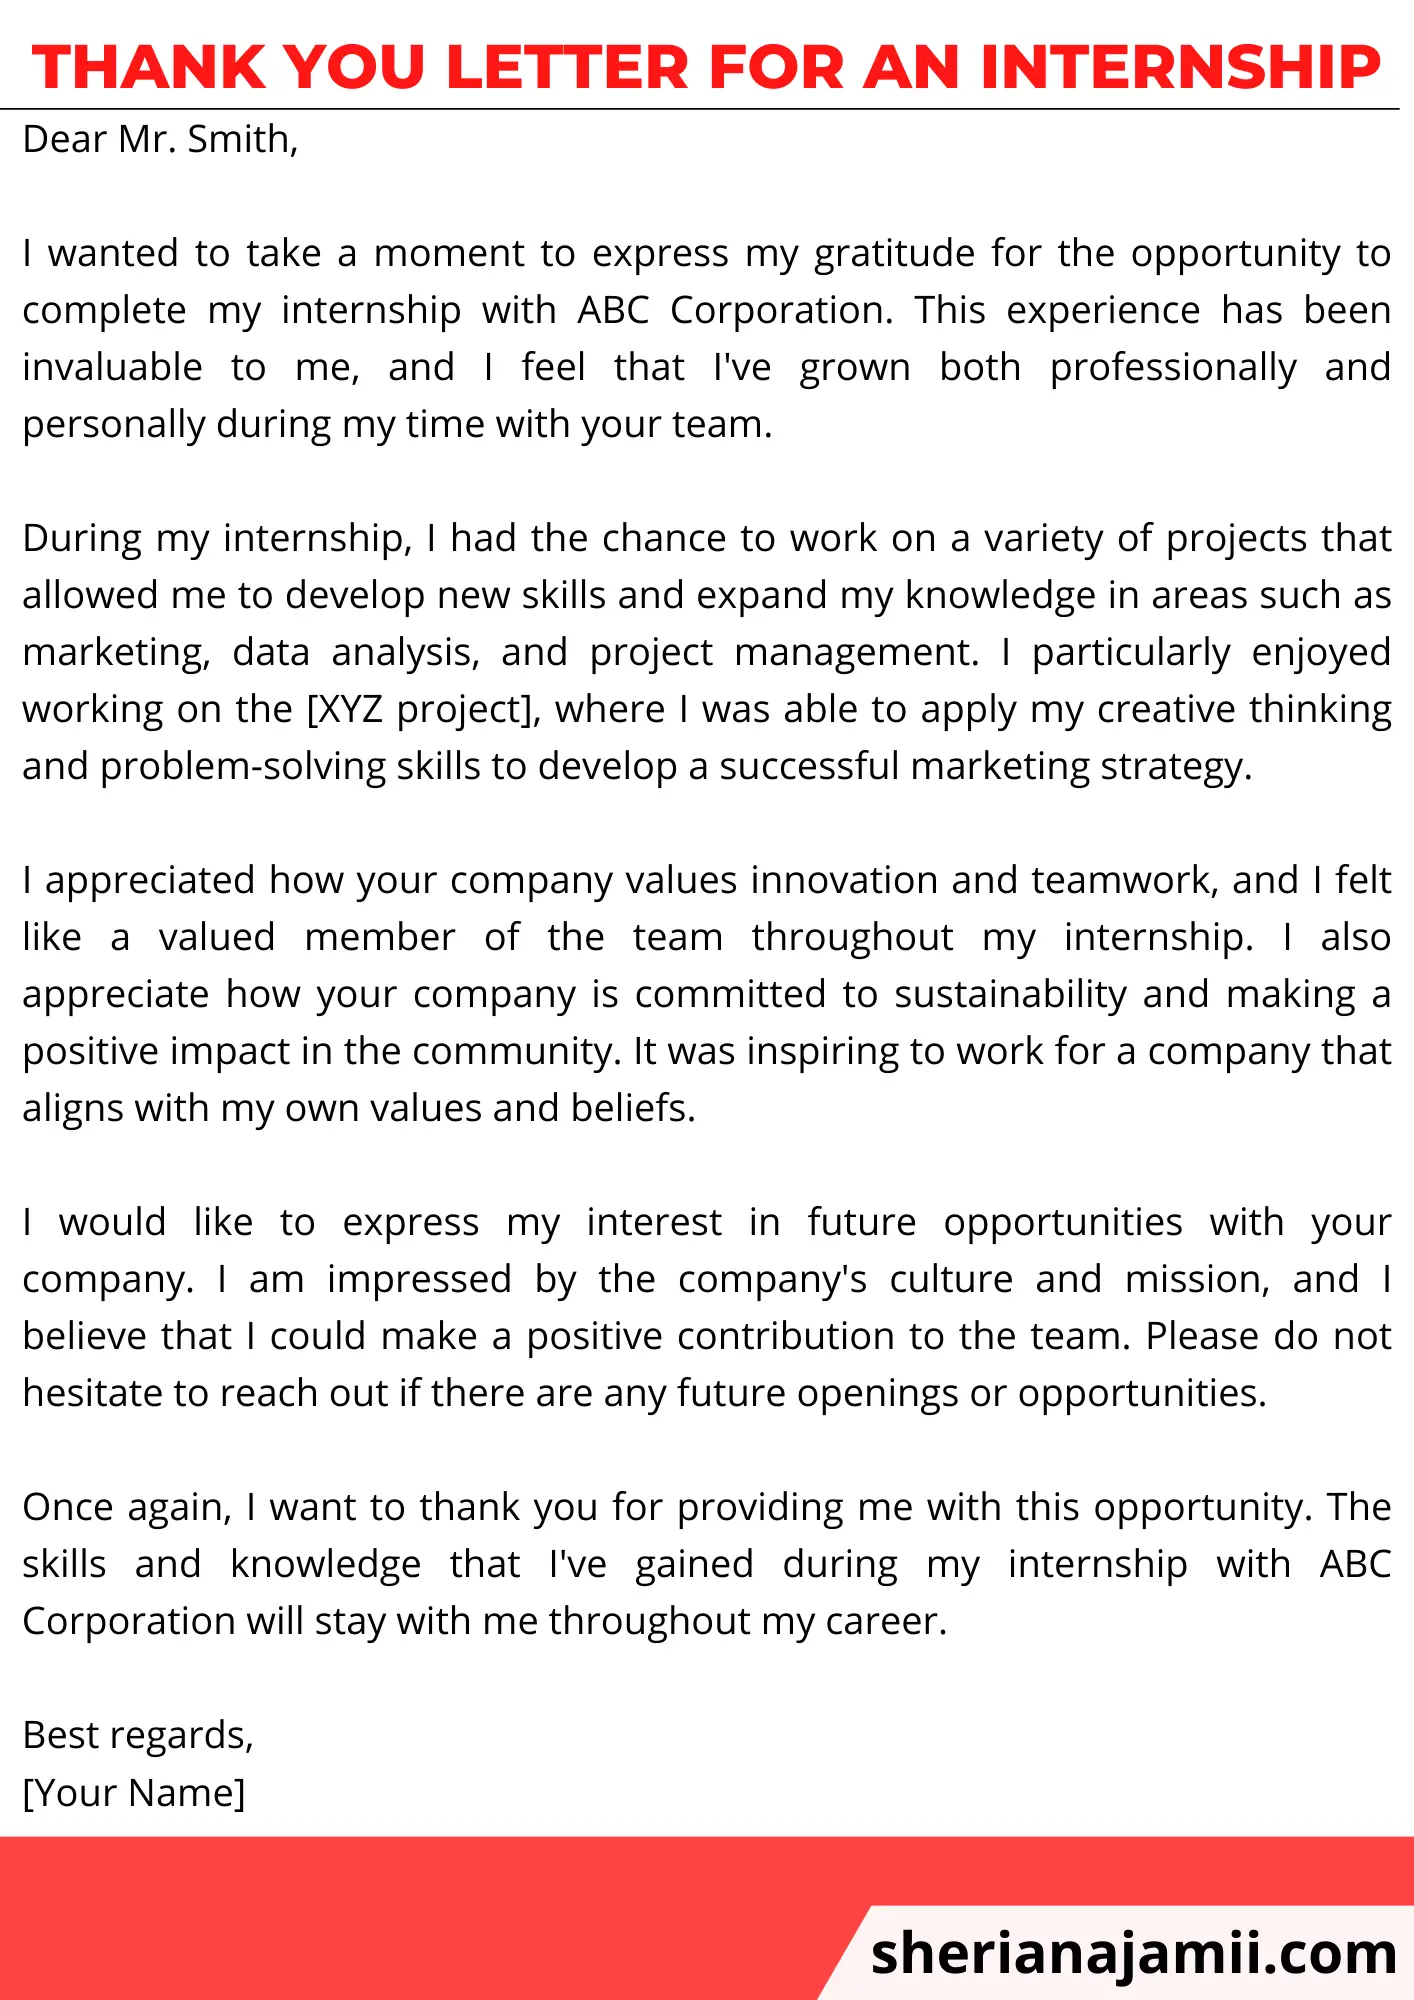 Thank you letter for an internship